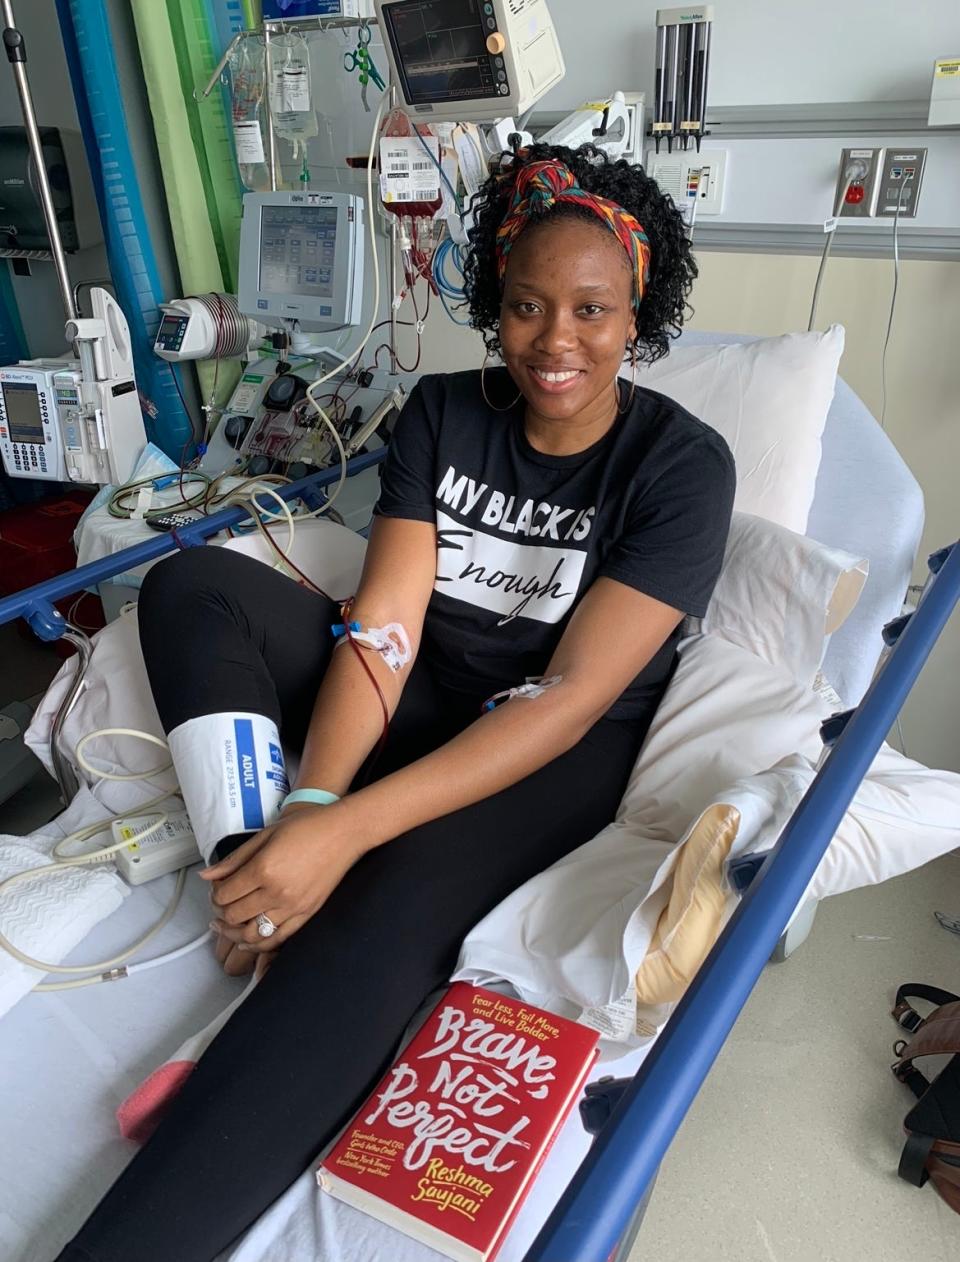 Habiba Bankston undergoes monthly blood transfusions as part of her treatment for sickle-cell disease. Each transfusion takes about five hours, she said.